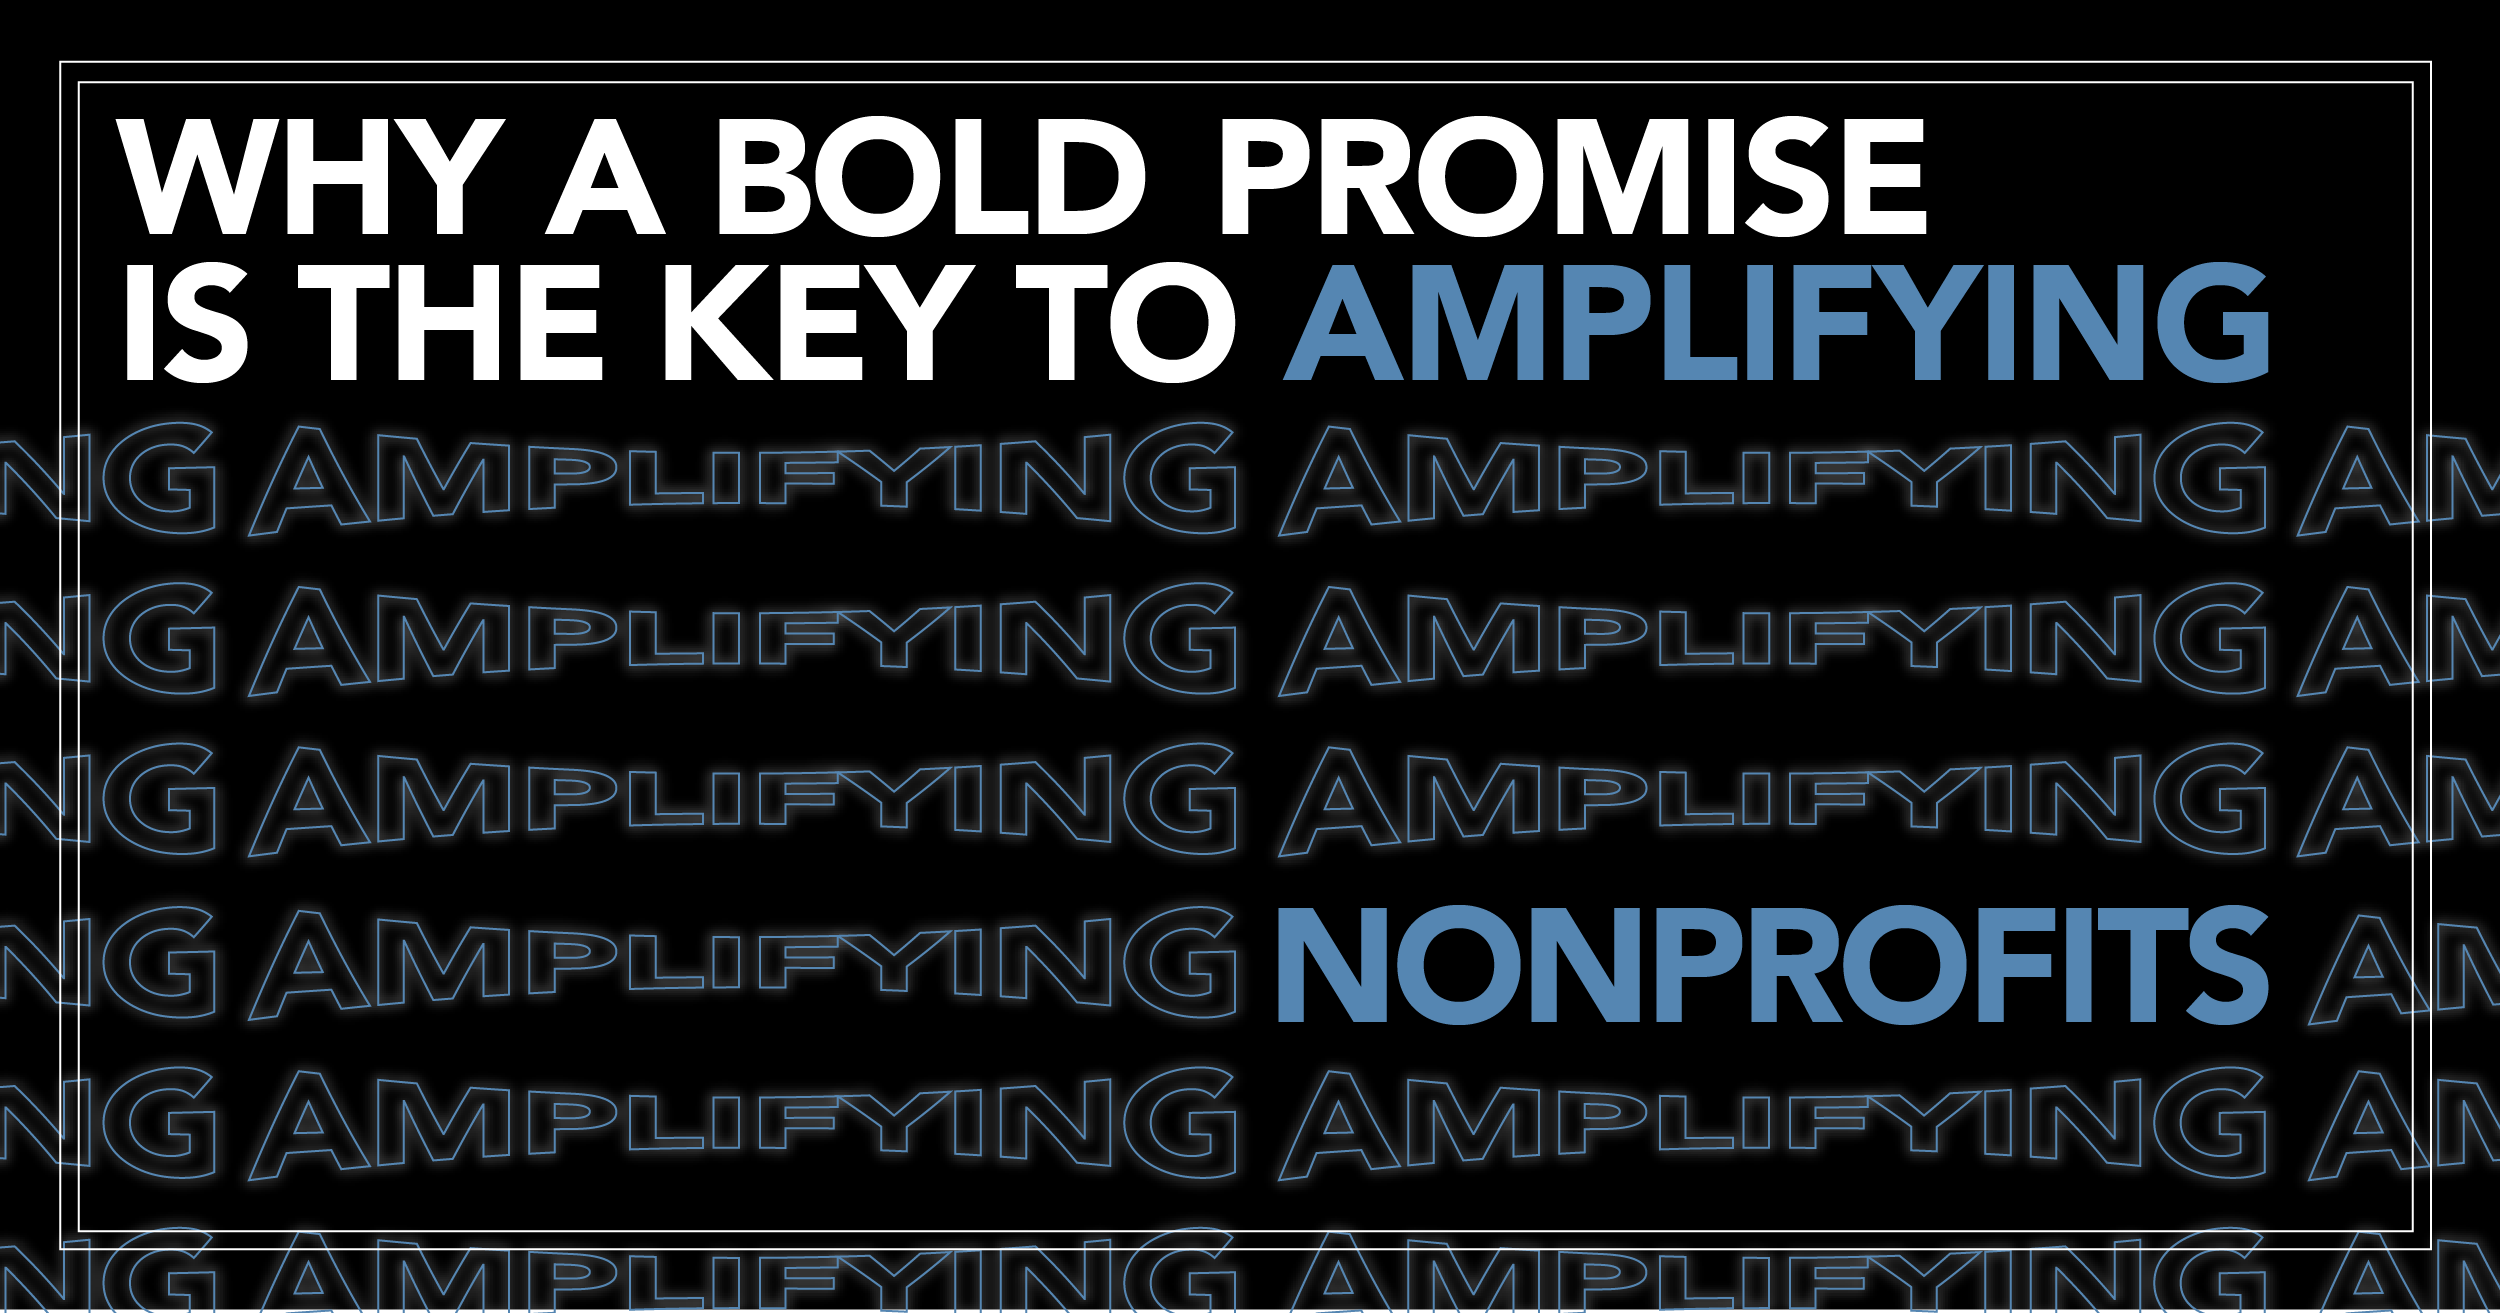 Why A Bold Promise is the Key to Amplifying Nonprofits